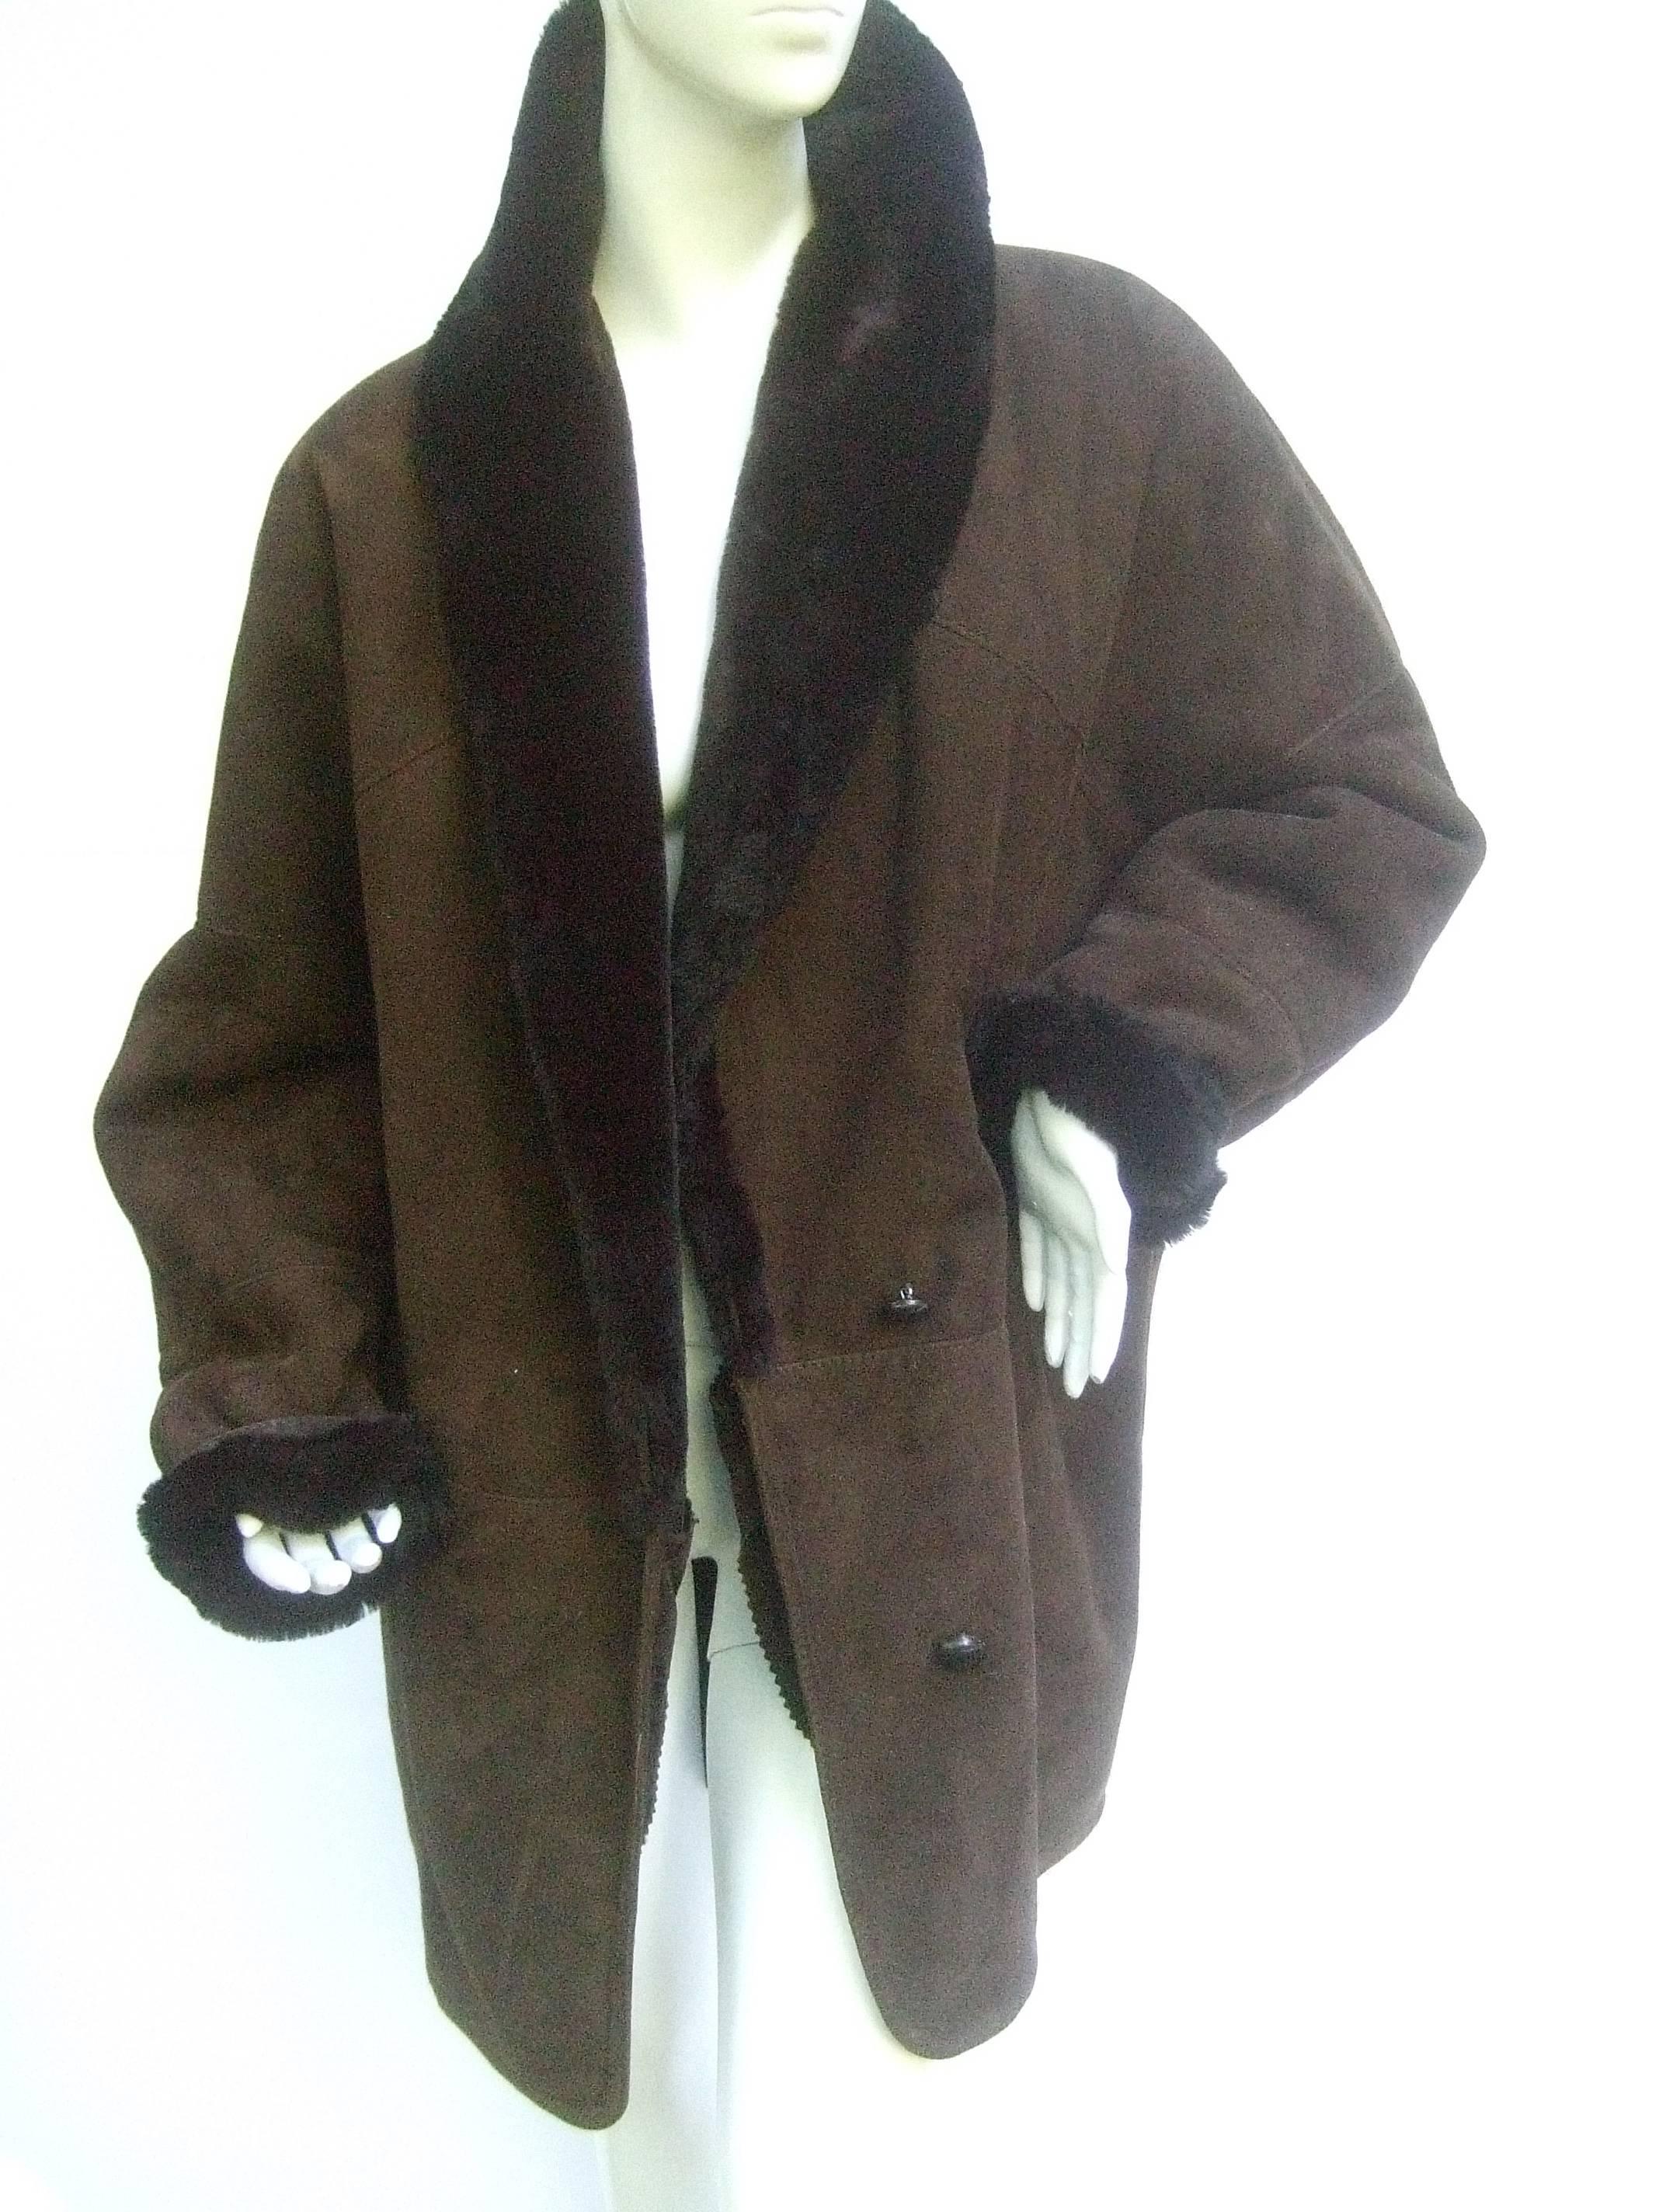 Neiman Marcus Chocolate brown suede shearling jacket 
The stylish winter jacket is designed with a dark brown
suede shell. Lined in plush dark brown faux fur 

The wide voluminous collar can be folded up
around the neckline to ward off cold